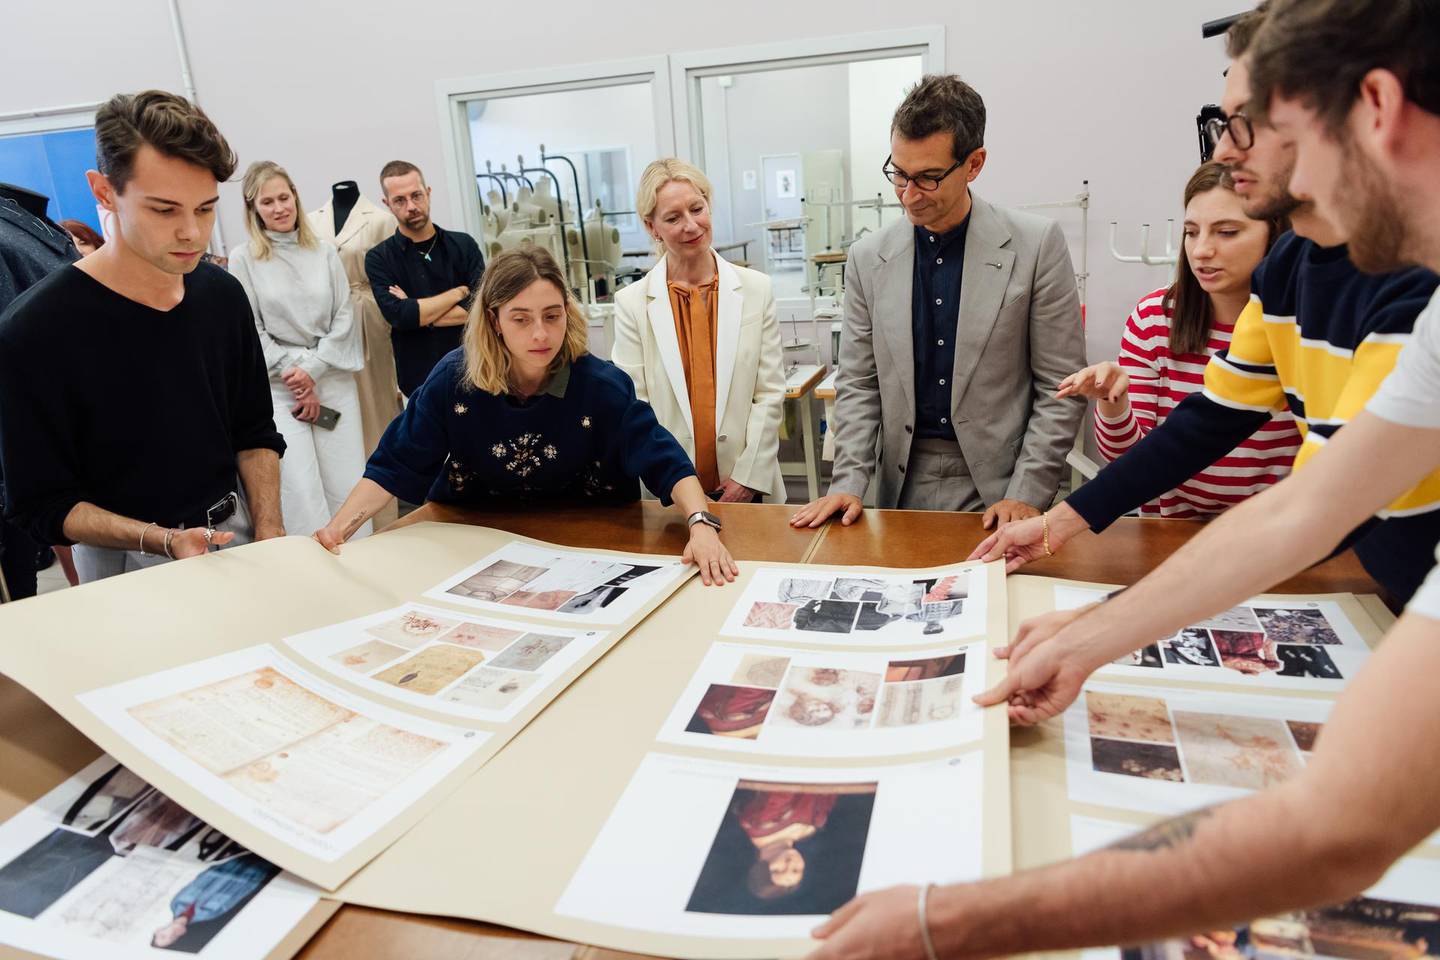 Marchetti discusses mood boards with the project's Italian students in Milan. Courtesy YNAP